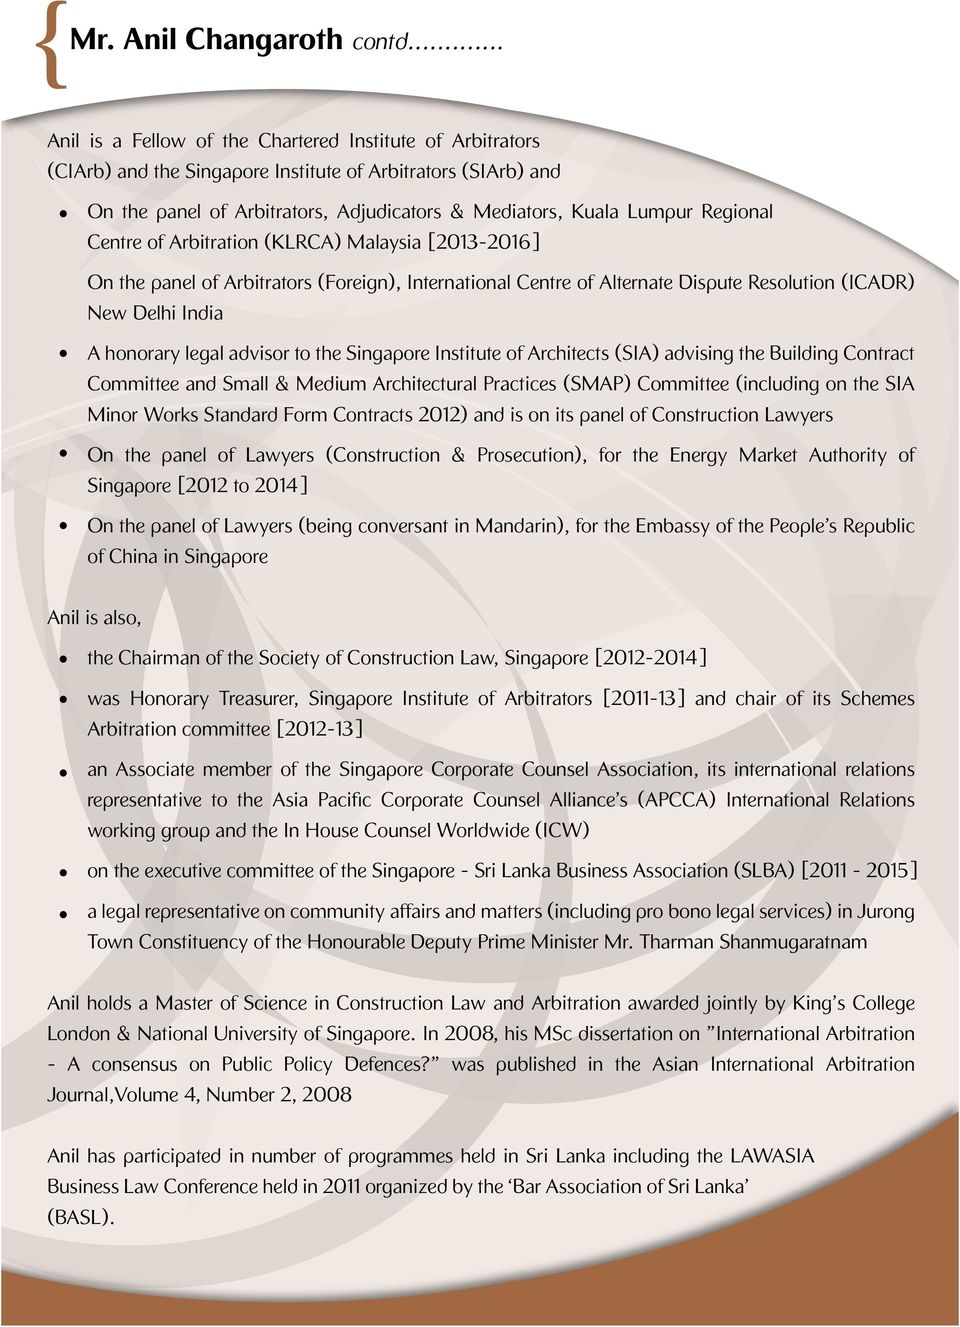 Regional Centre of Arbitration (KLRCA) Malaysia [2013-2016] On the panel of Arbitrators (Foreign), International Centre of Alternate Dispute Resolution (ICADR) New Delhi India A honorary legal